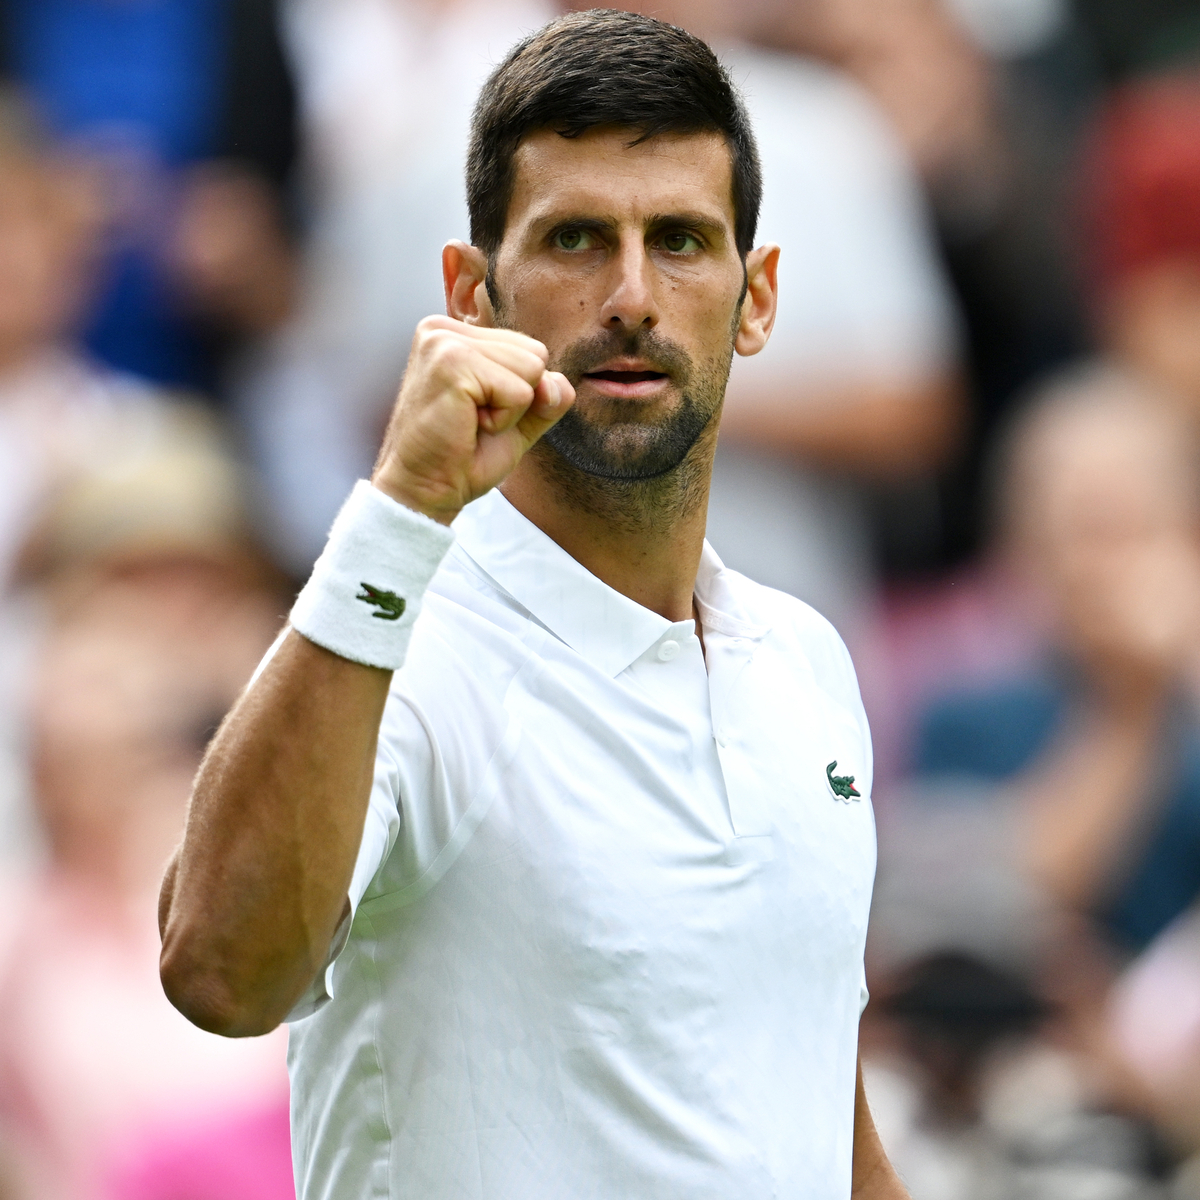 Novak Djokovic Withdraws From French Open After Suffering Knee Injury